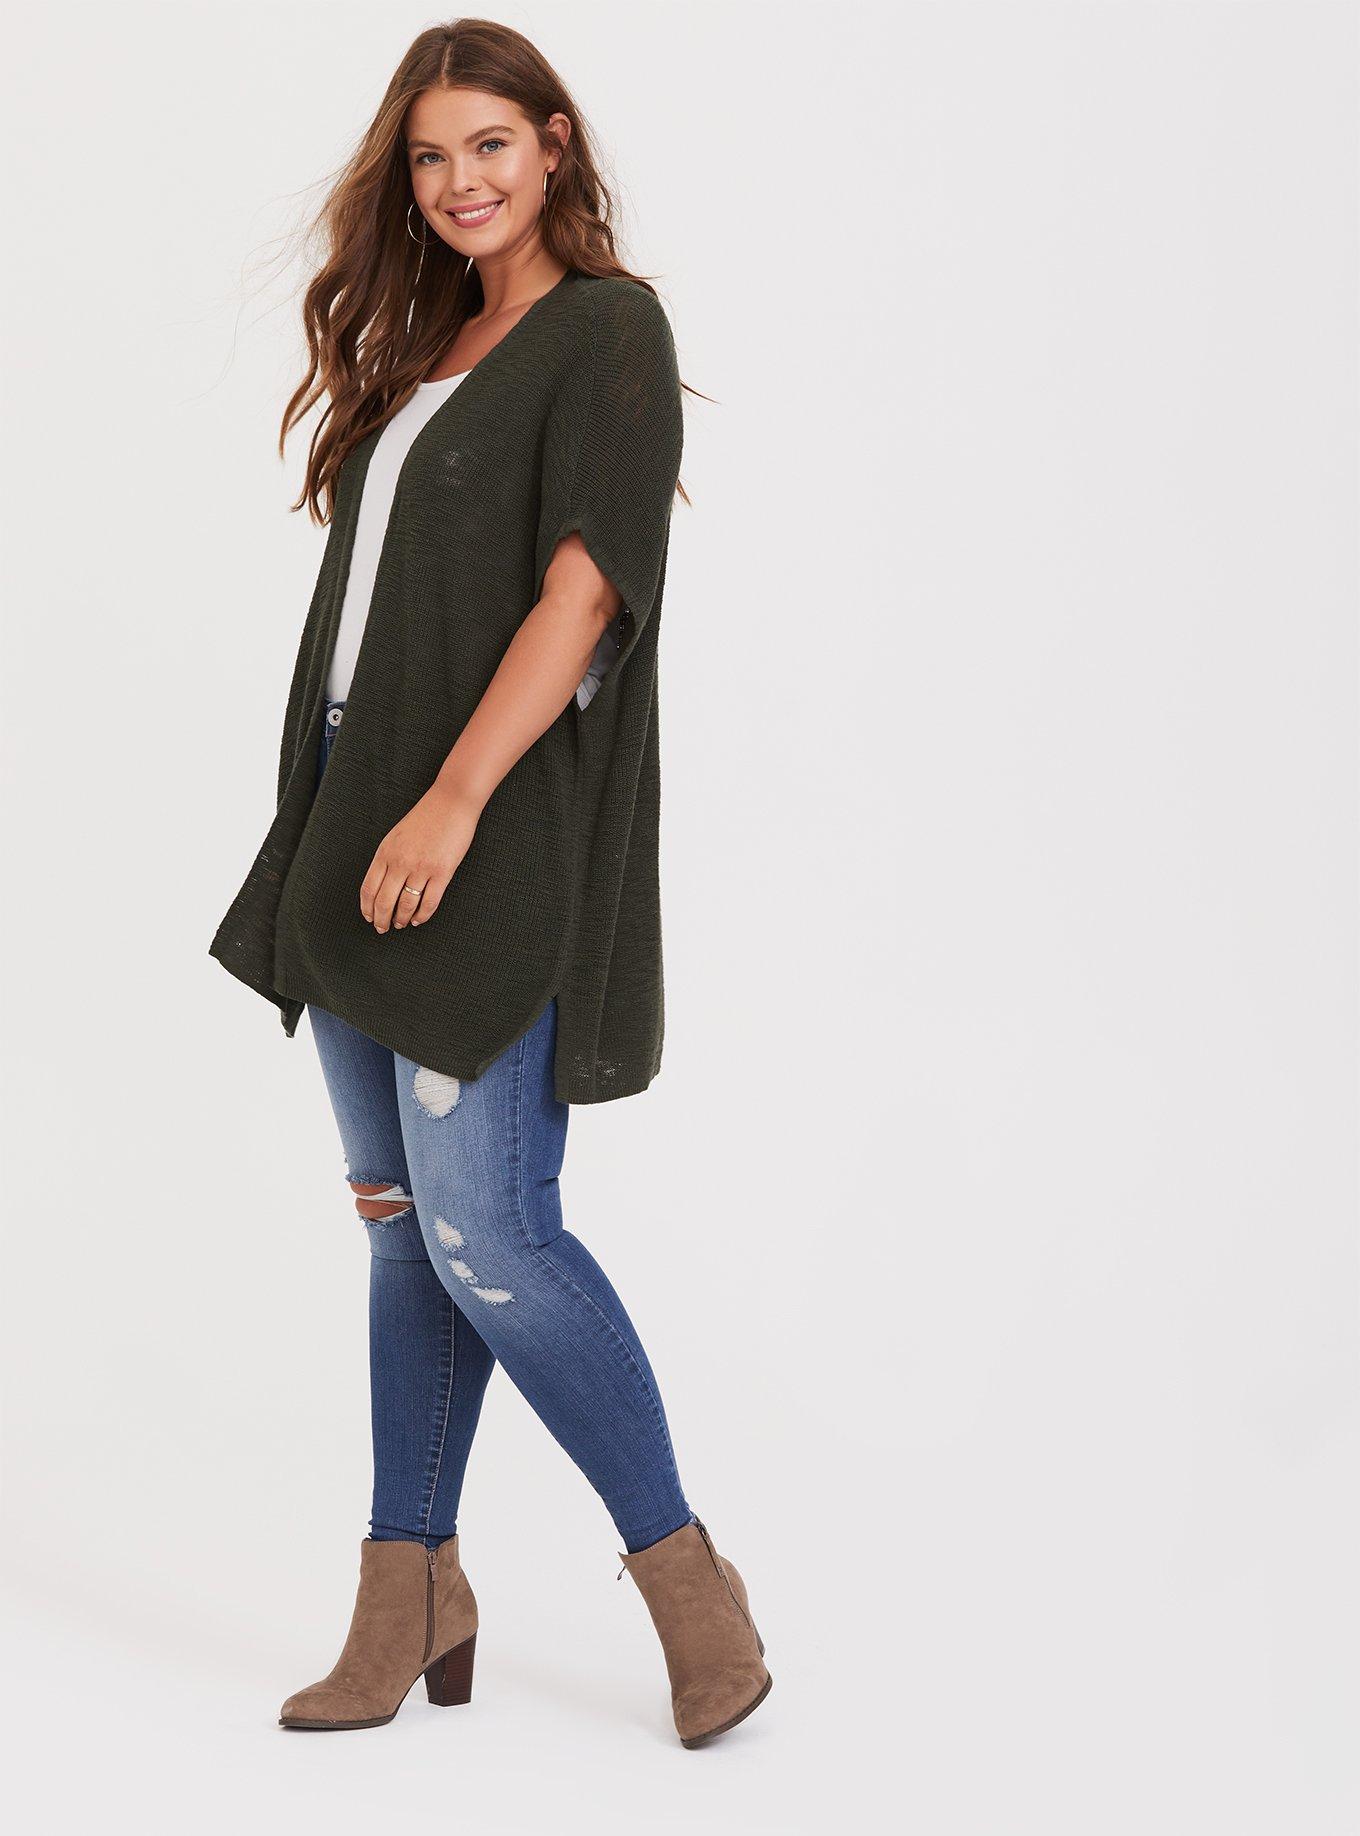 Olive Green Drape Front Sheer Knit Cardigan.Torrid. Plus Size 3X - clothing  & accessories - by owner - craigslist